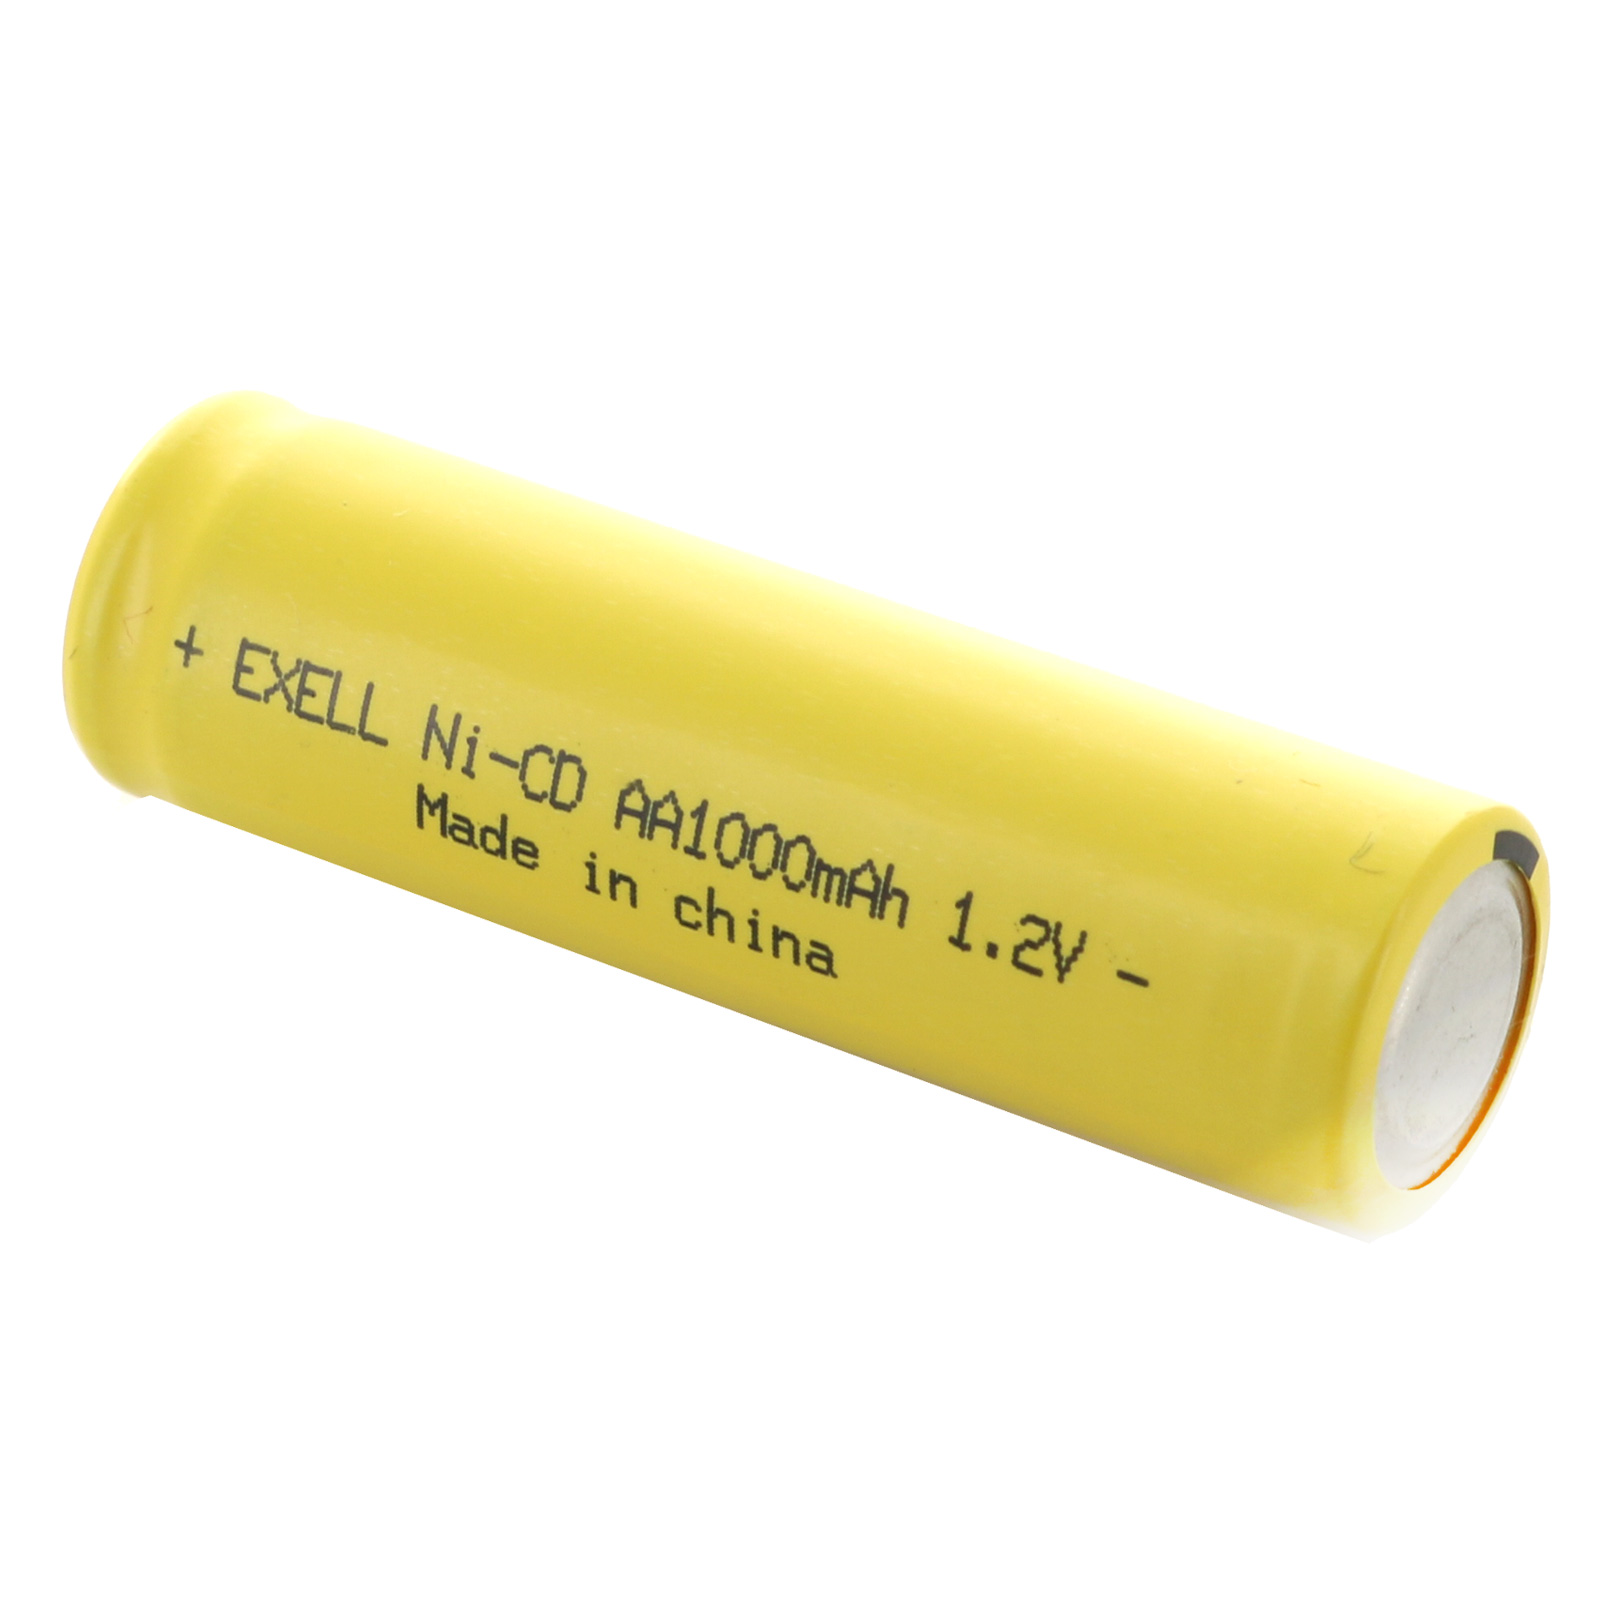 AA 1.2V 1000mAh Flat Top Rechargeable Battery for DIY, Radios, Power Packs - image 2 of 7